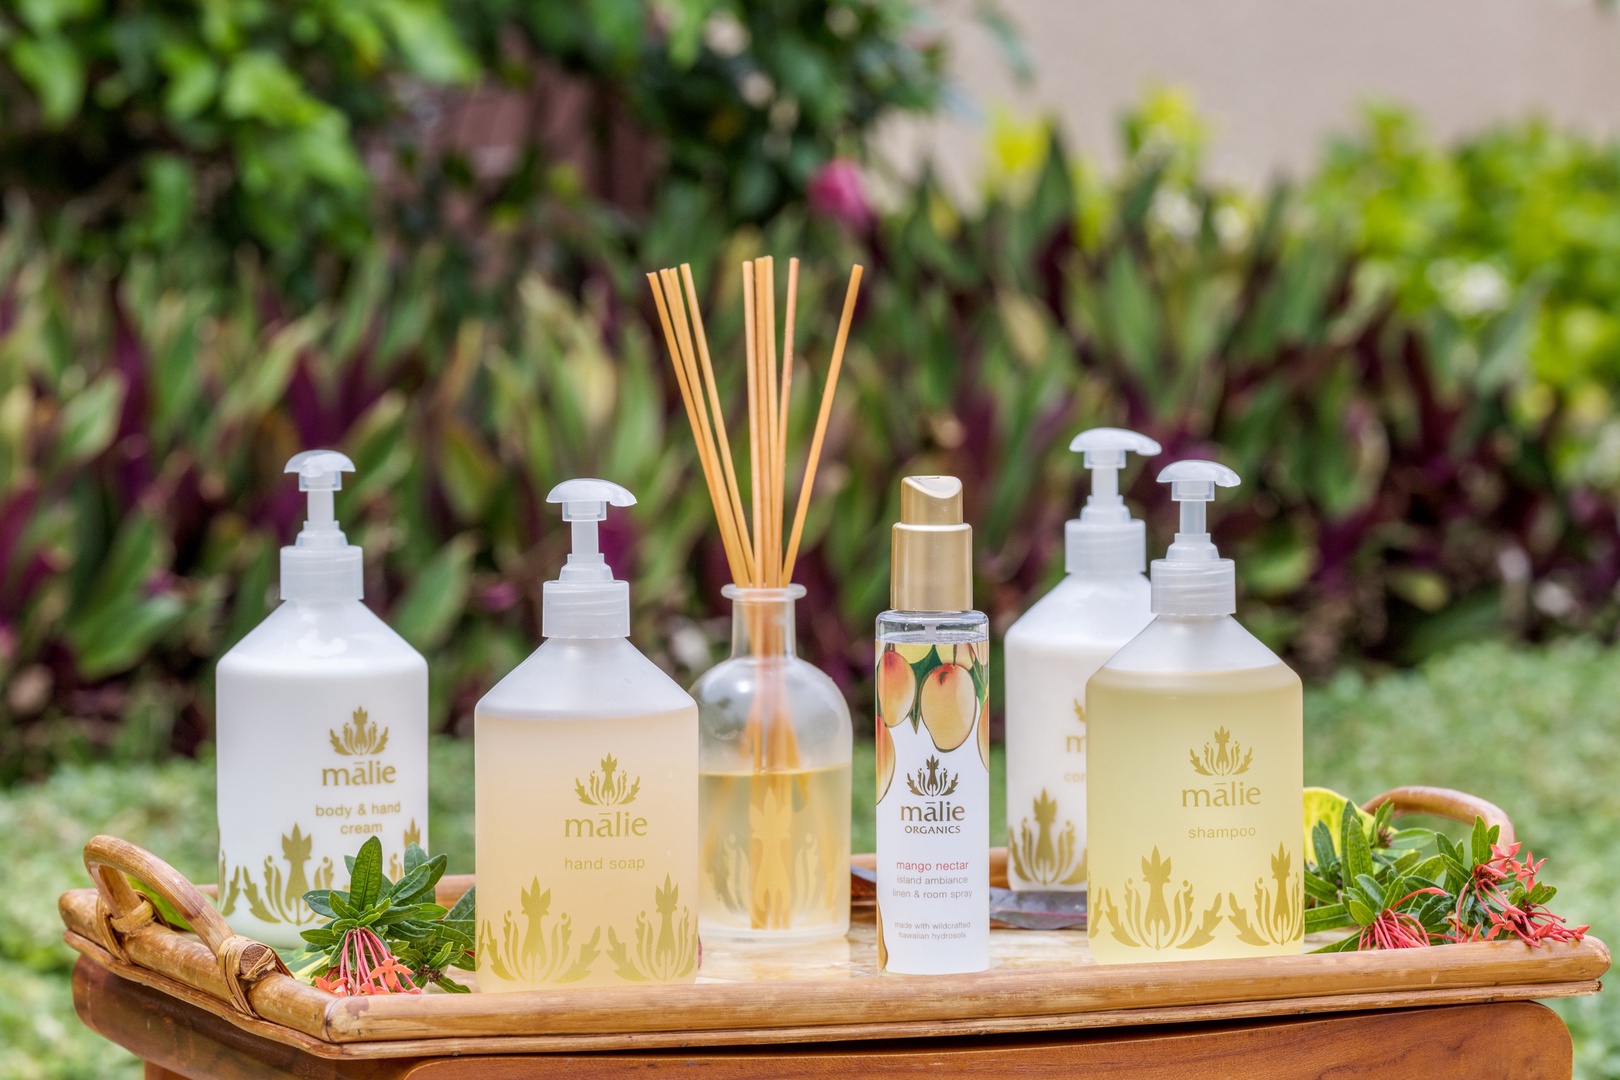 Kailua Kona Vacation Rentals, 3BD Golf Villa (3101) at Four Seasons Resort at Hualalai - All natural Malie bath amenities add even more heavenly scents to your stay!